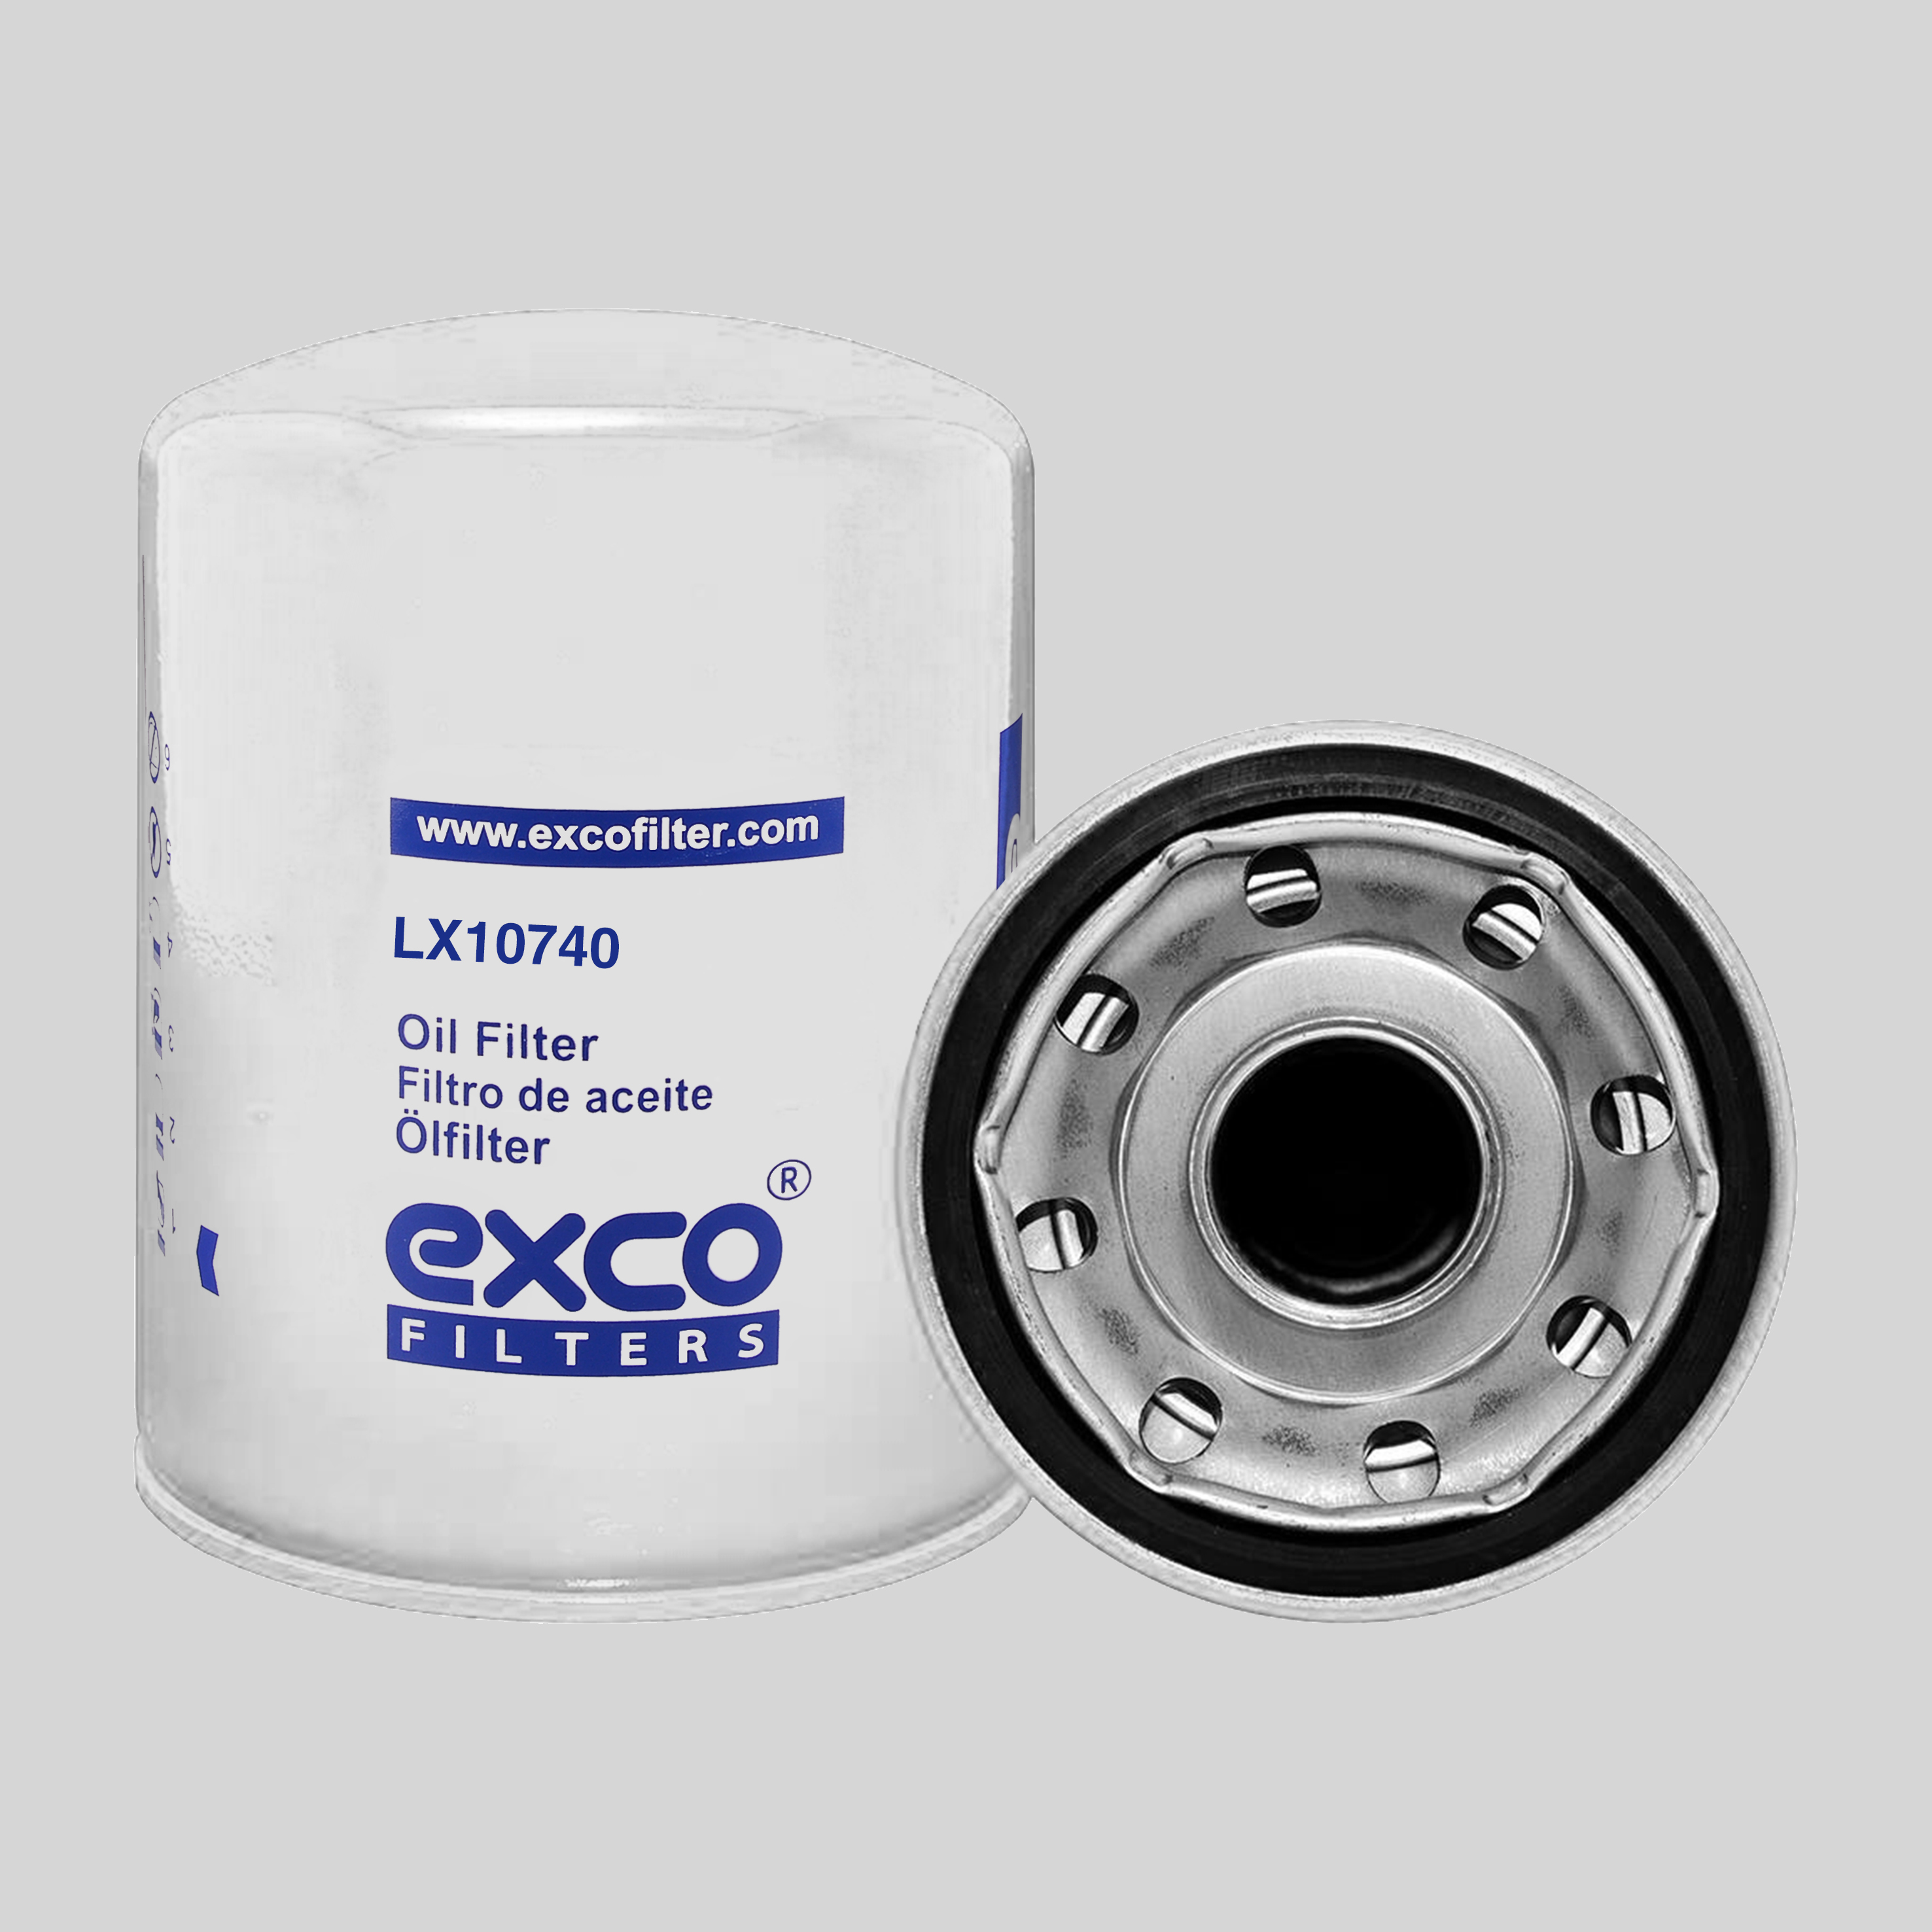 
                        
                                                                                                                AC-Delco K4 - oil filter cross reference - excofilter
                                                                                    
                            